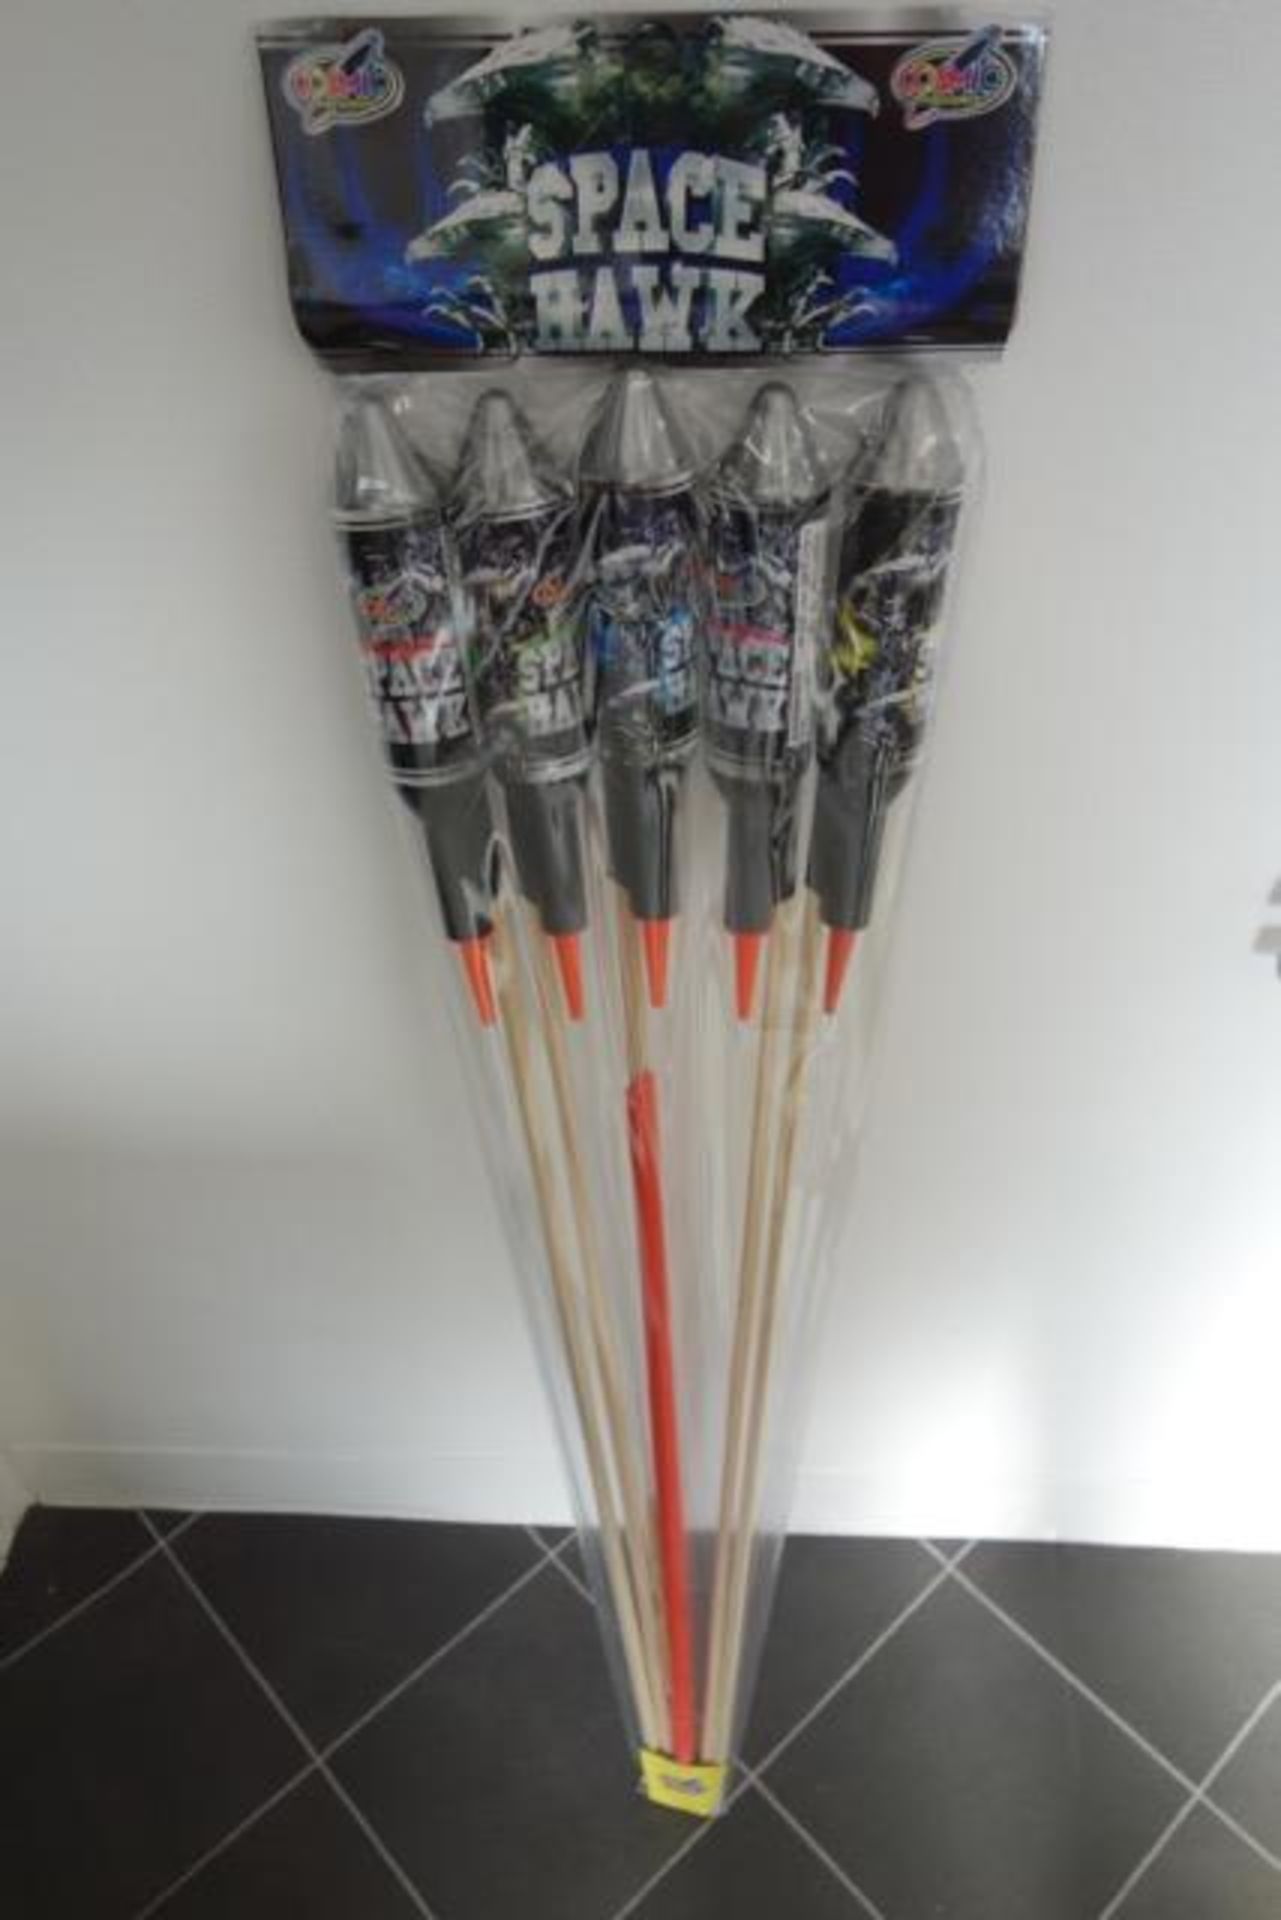 6 x Packs of 5 Space hawk rockets, High quality loud rockets. 'The best around' New and Sealed. £